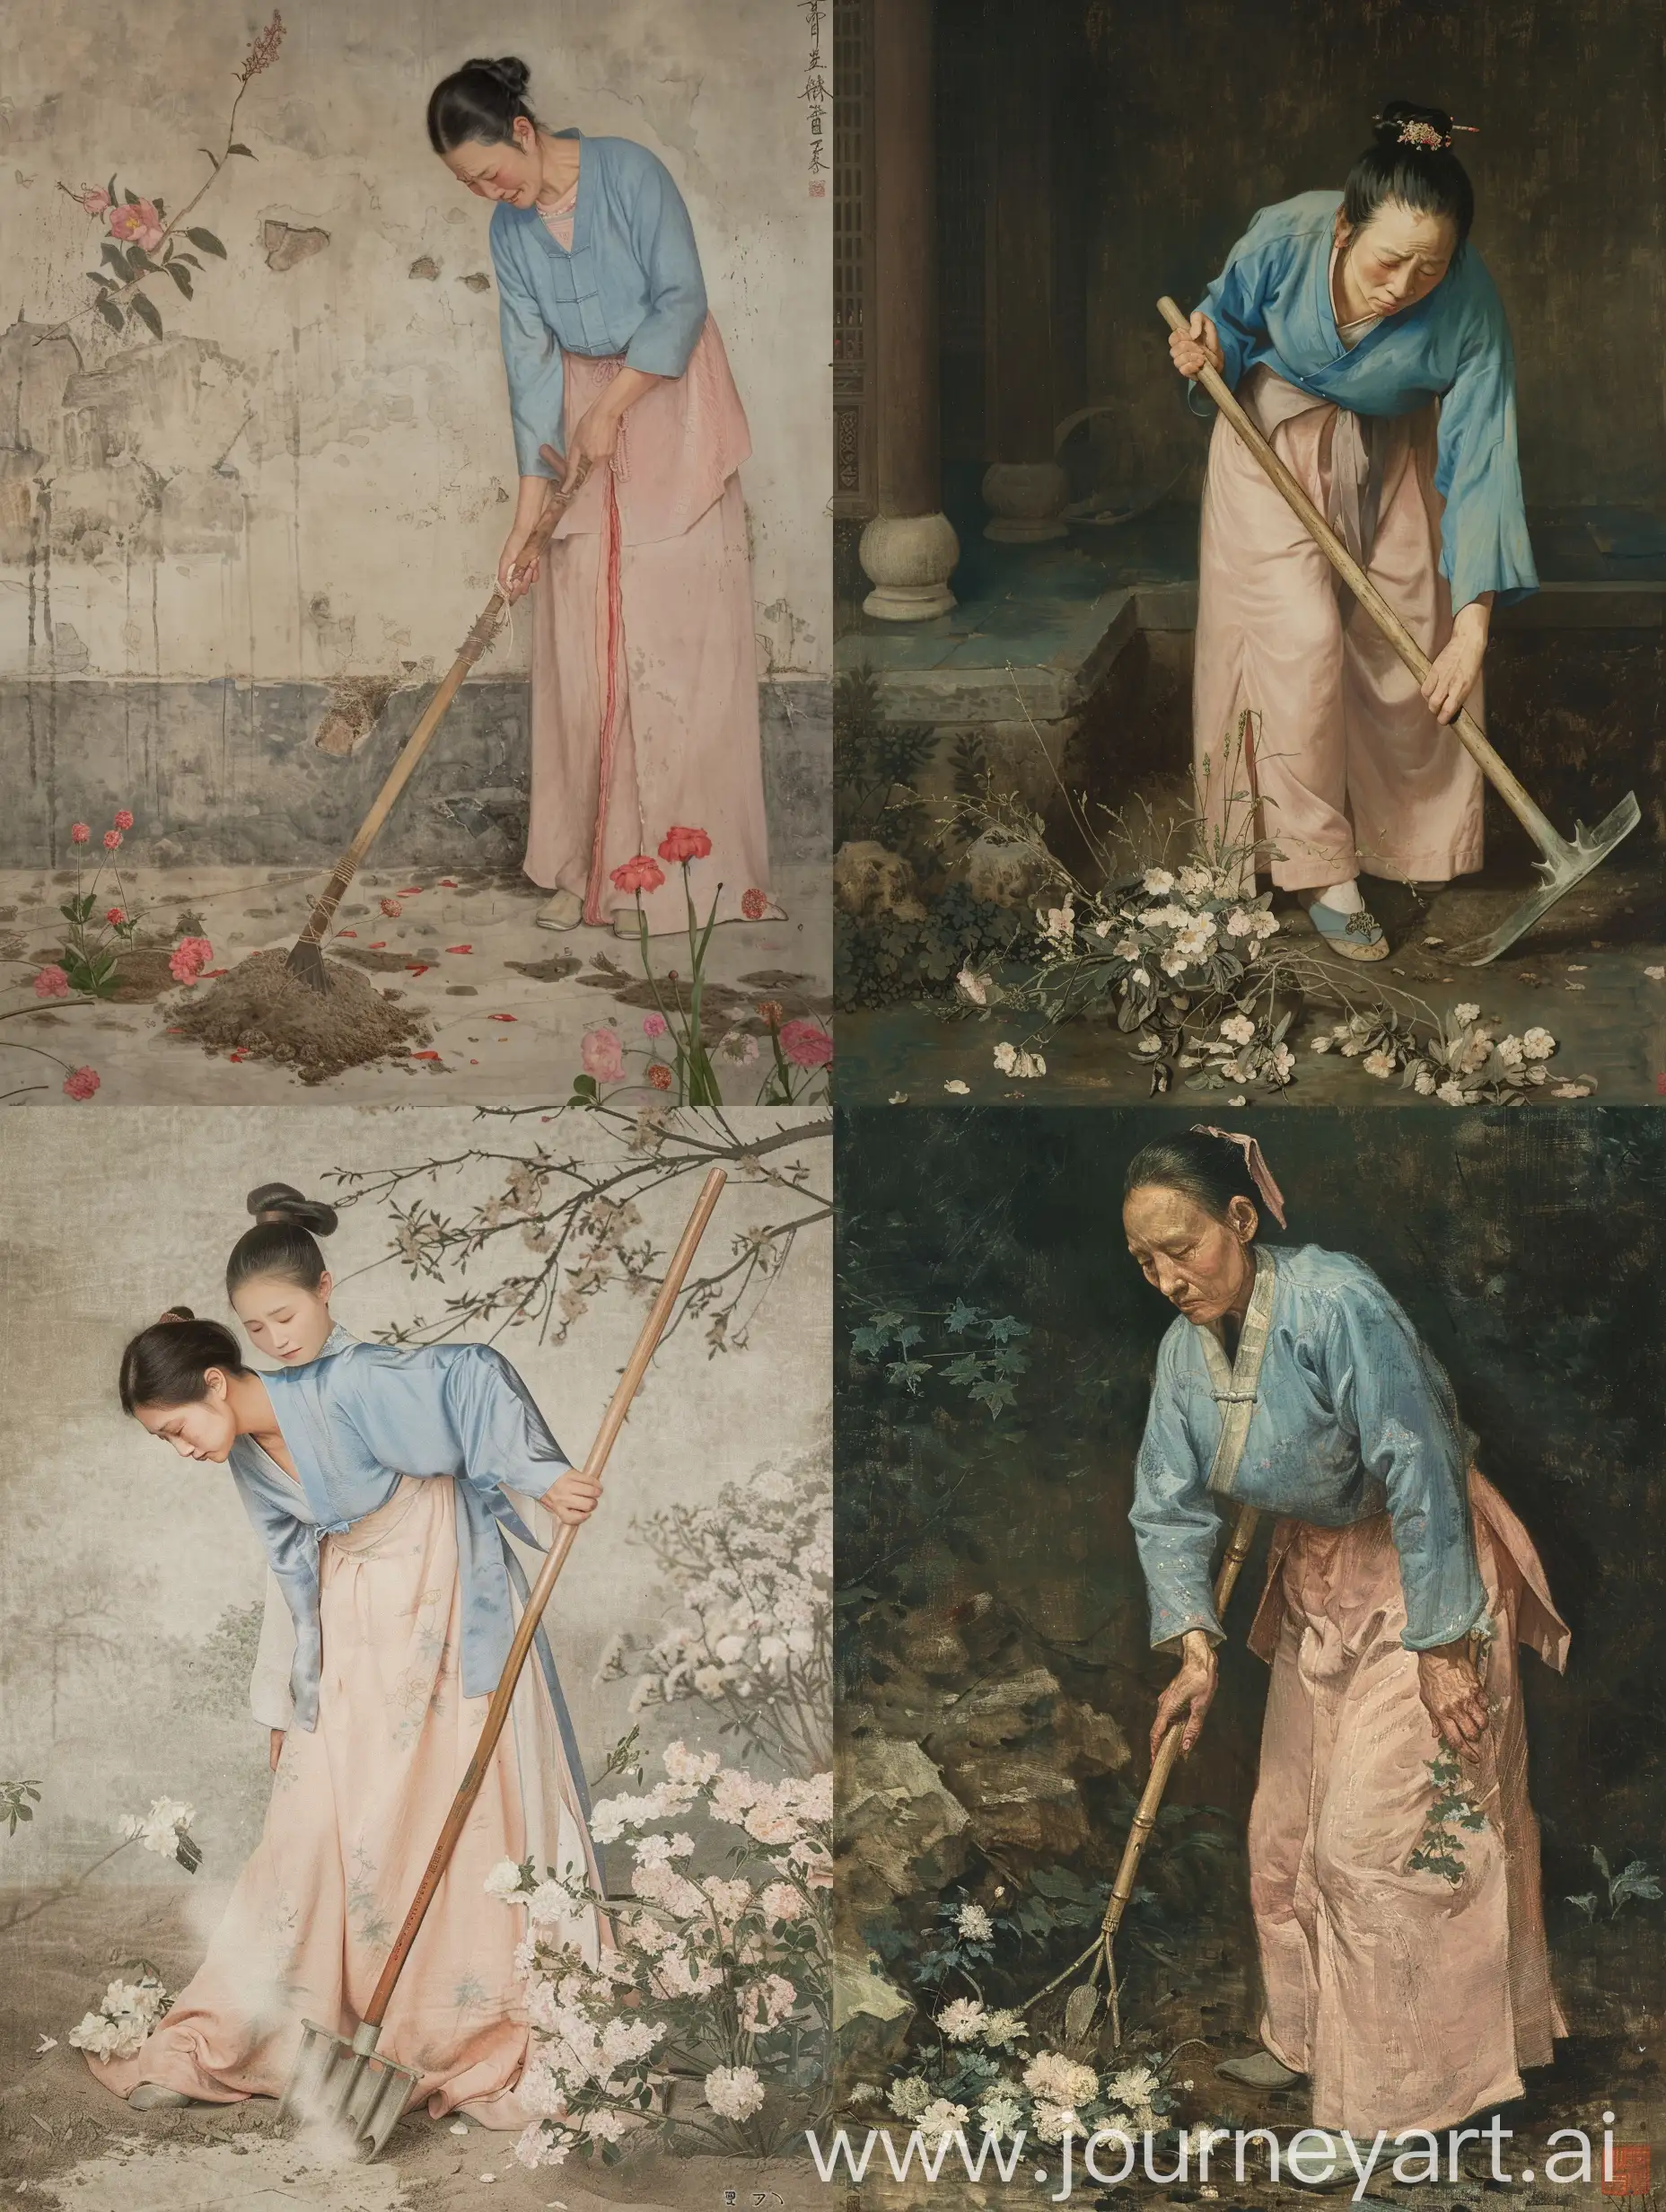 In the garden of Suzhou, an ancient woman, Lin Daiyu, wearing a light pink Hanfu and a blue shirt, holding a hoe in her right hand and her left hand, The woman wept and buried the flowers in the pit